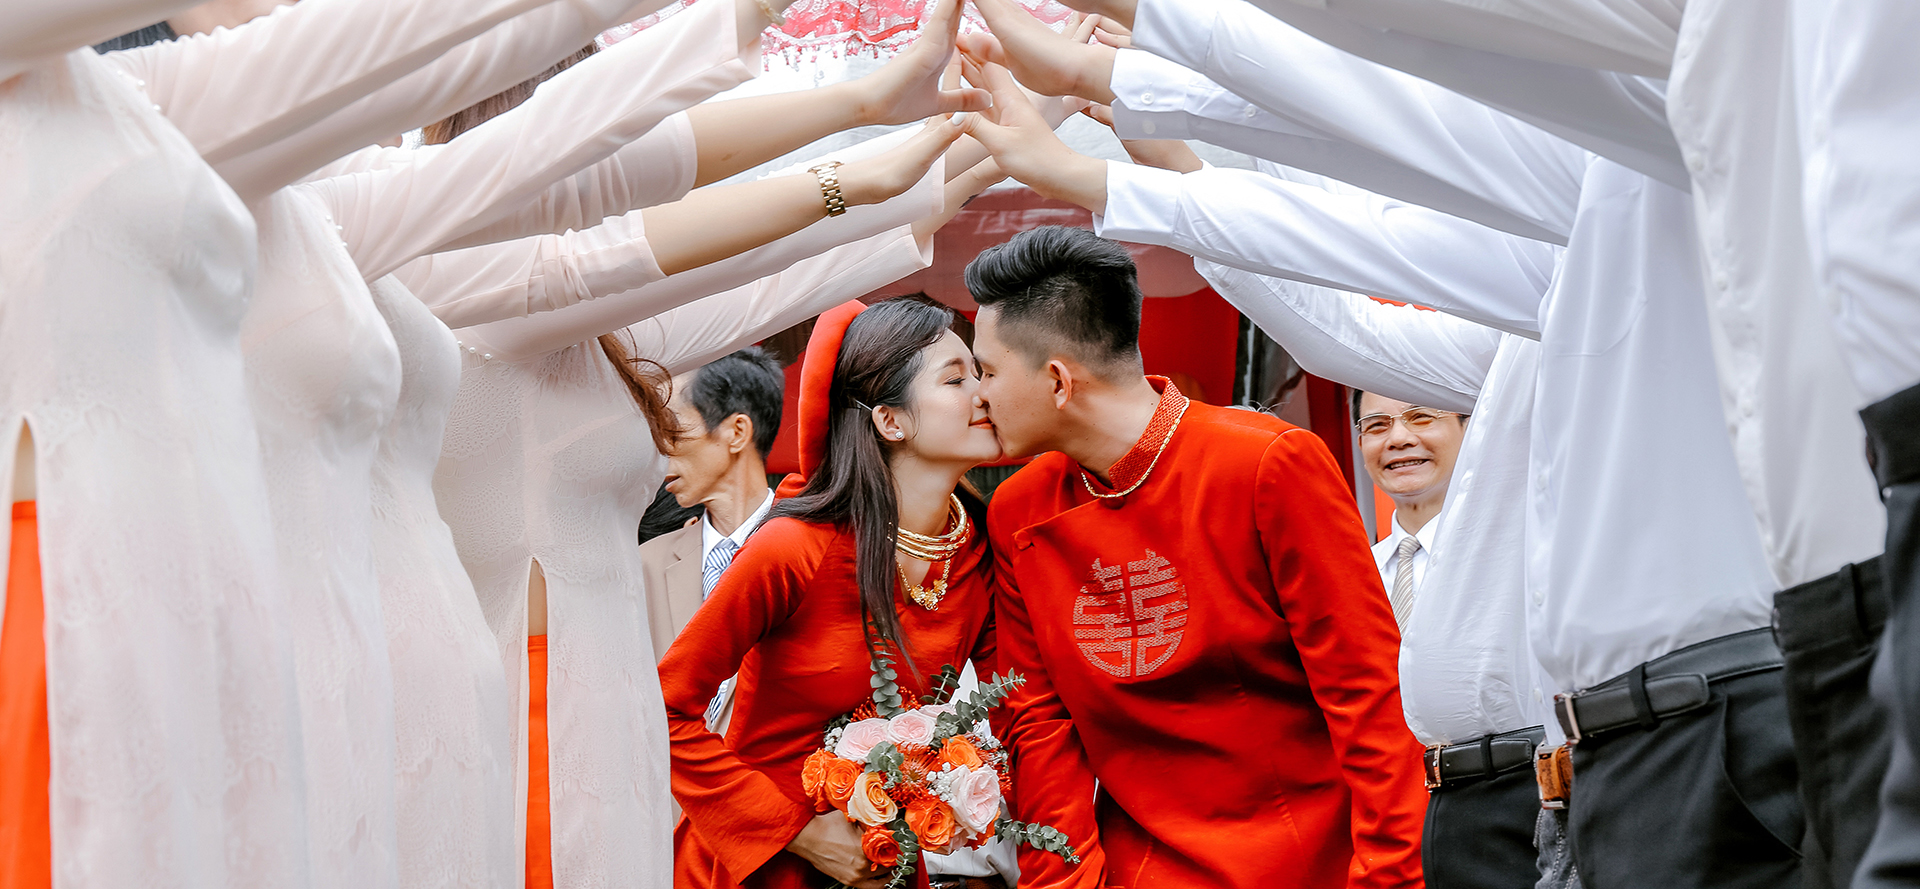 A Chinese couple celebrating their wedding.